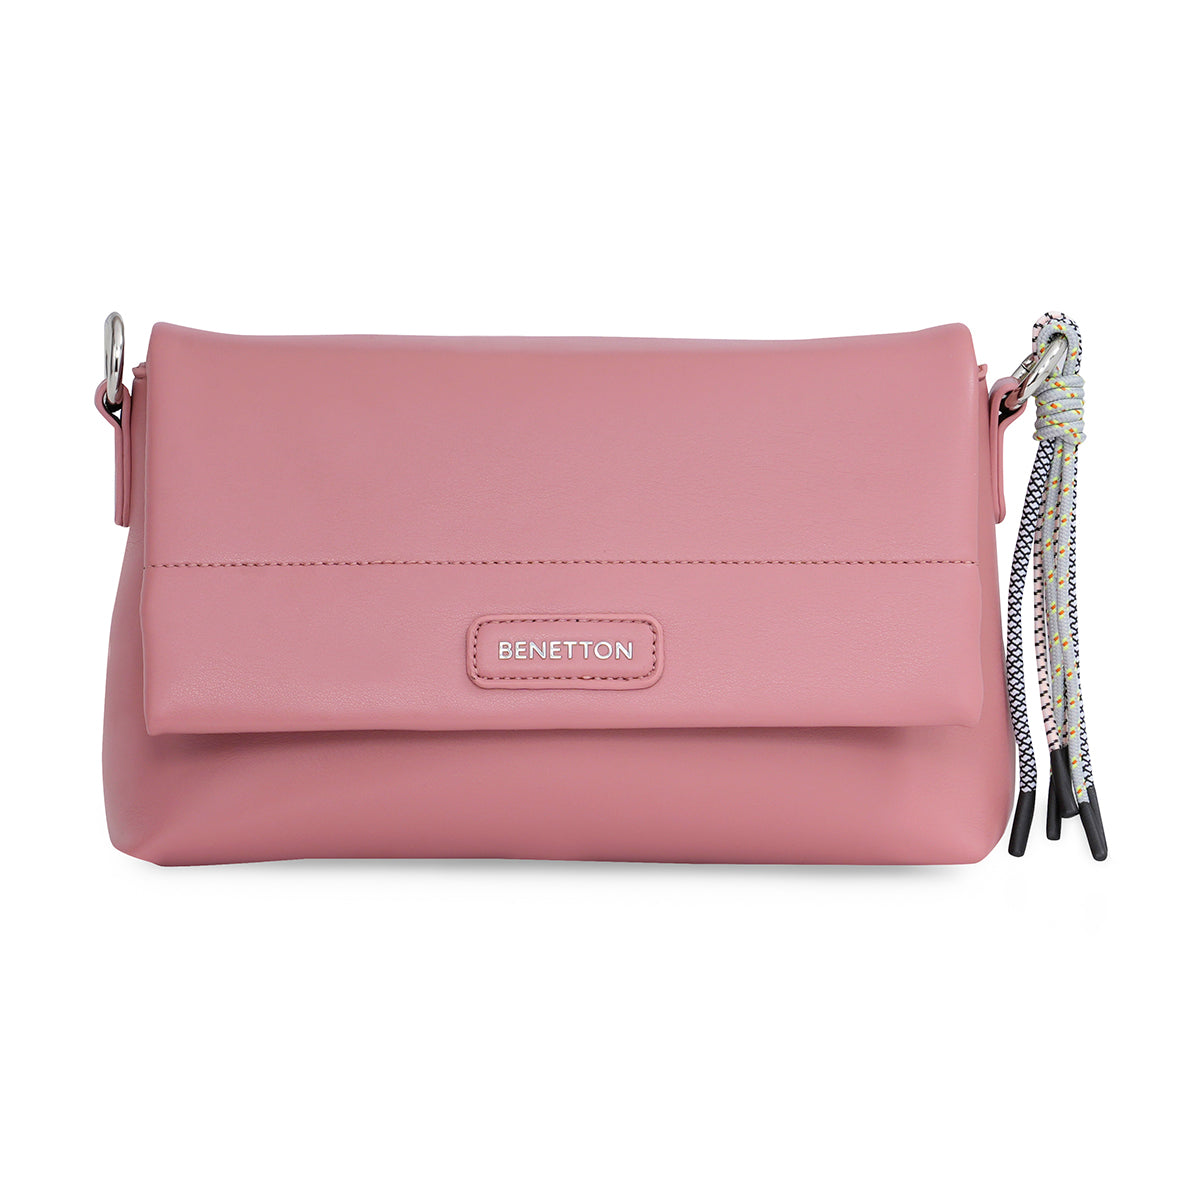 United Colors of Benetton Lilly Sling Pink